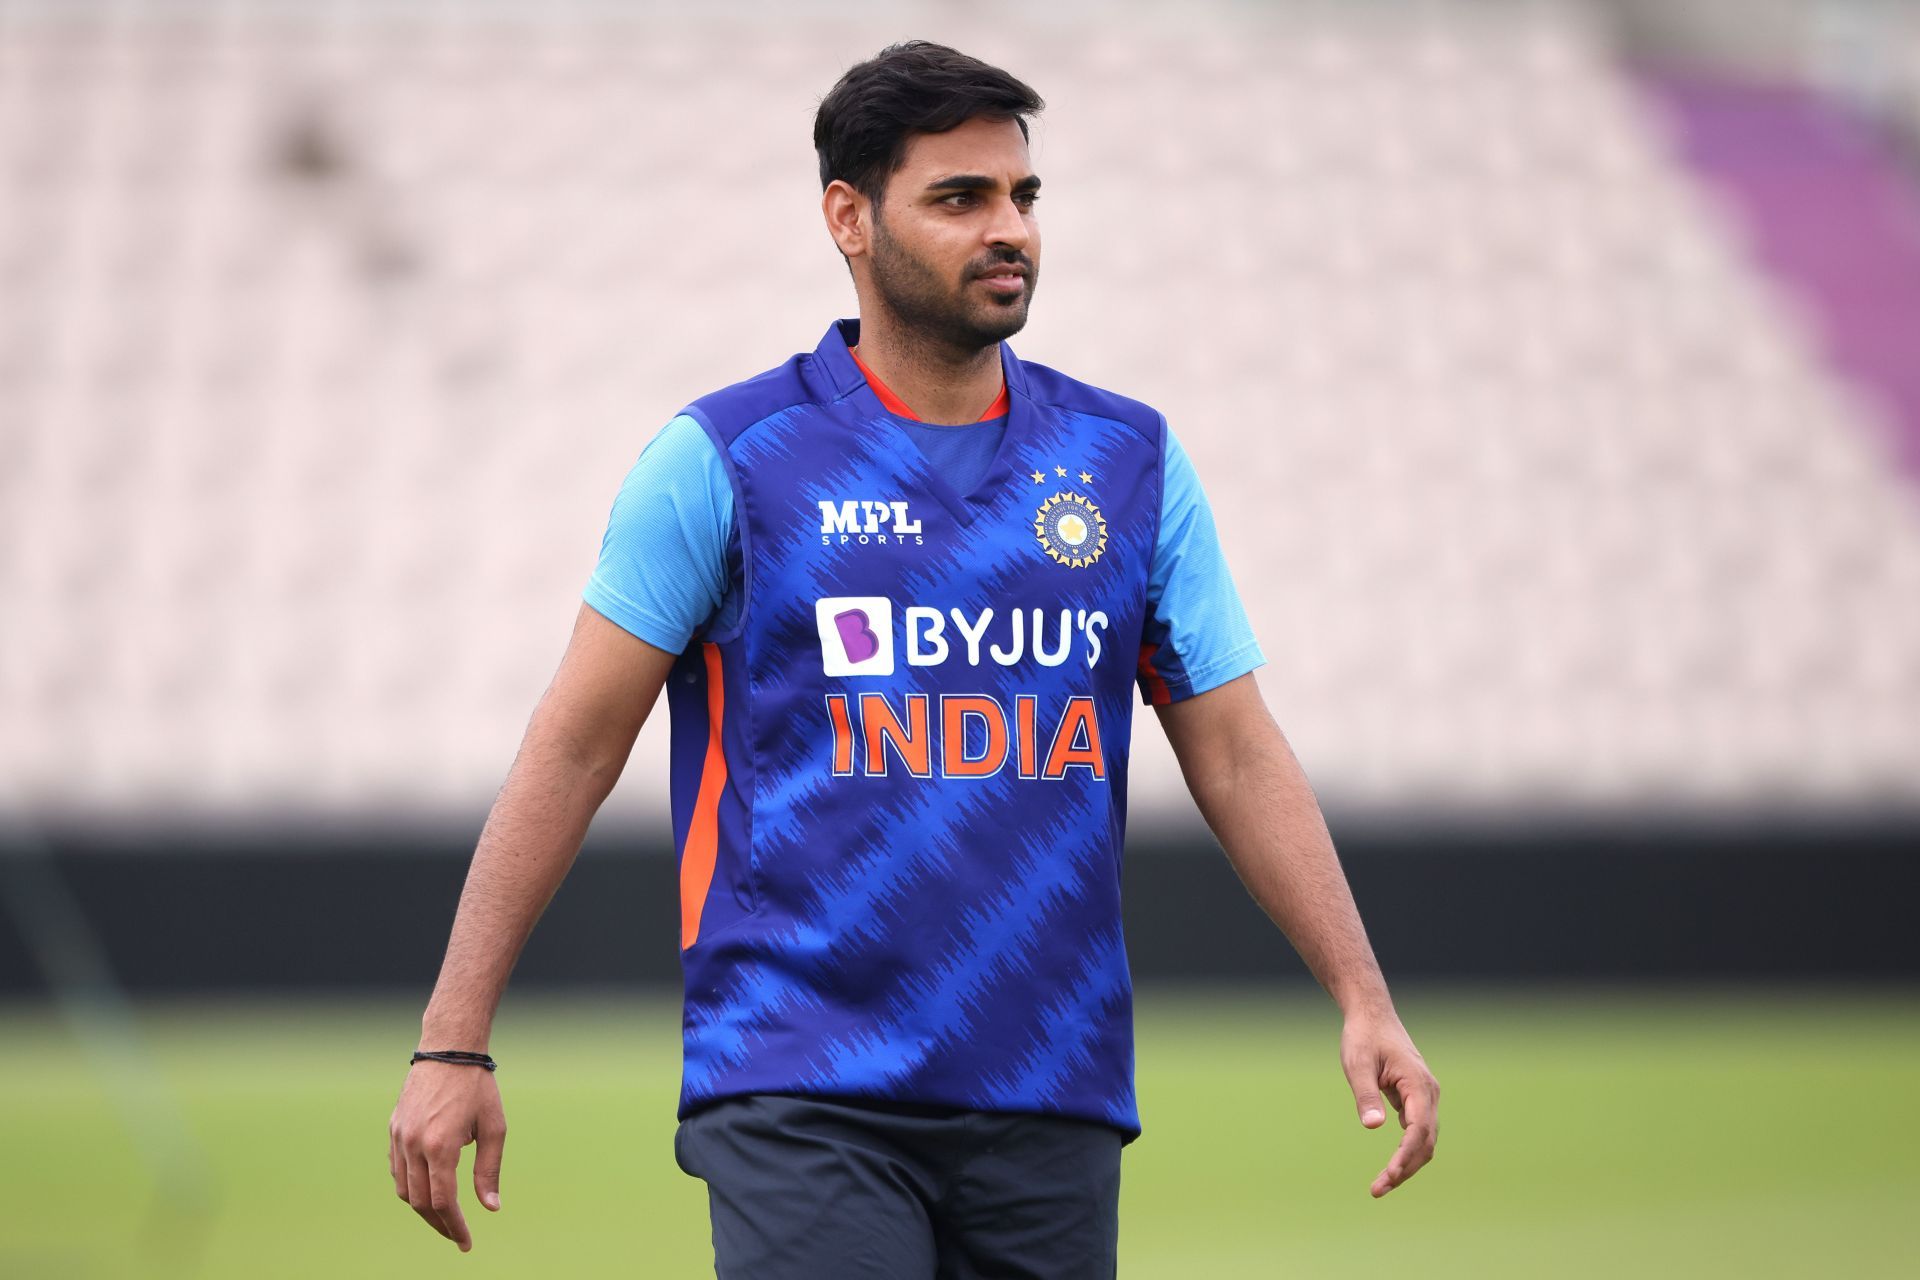 Bhuvneshwar Kumar has been with the Hyderabad franchise since 2014